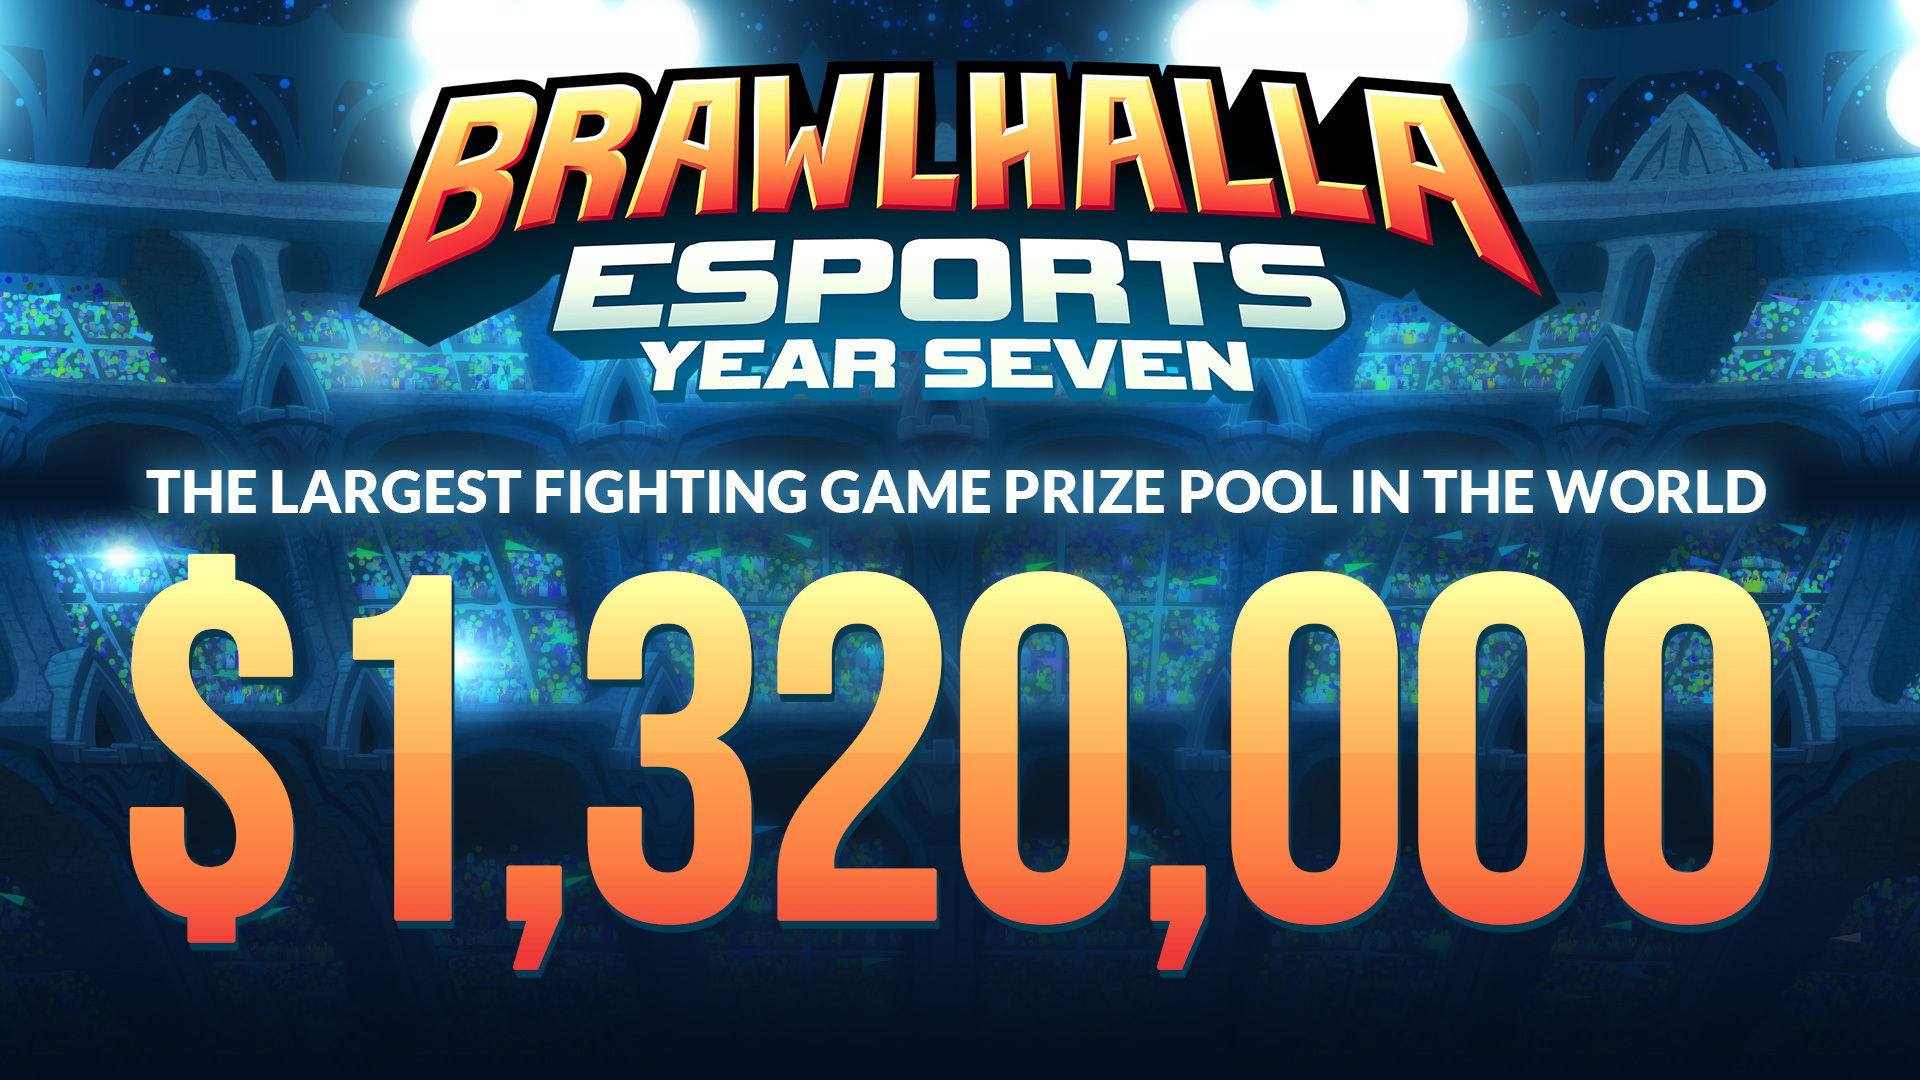 Brawlhalla Esports Year Seven Kicks off With the Largest Fighting Game Prize Pool in the World